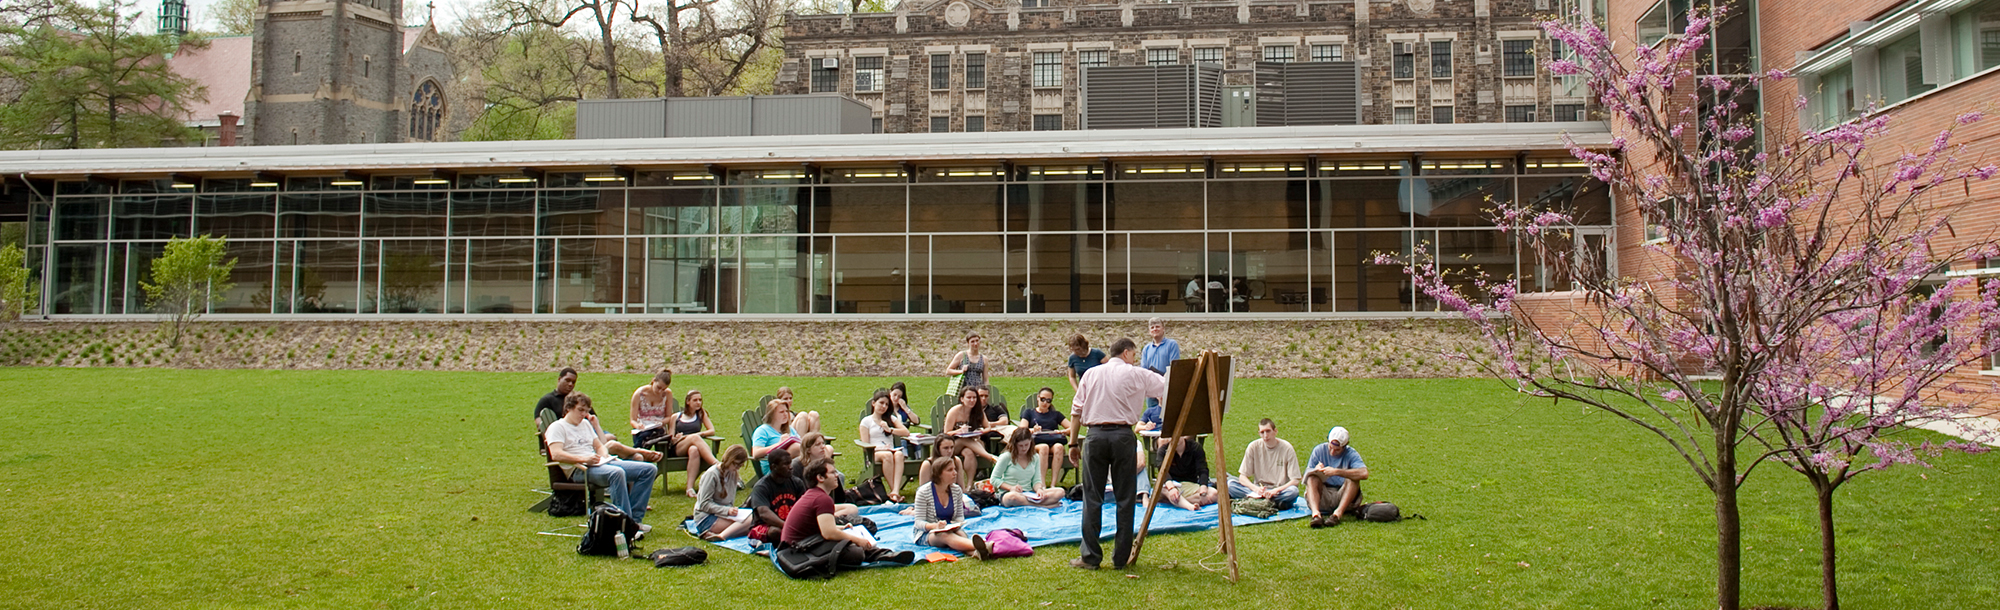 A class being taught outside on the grass